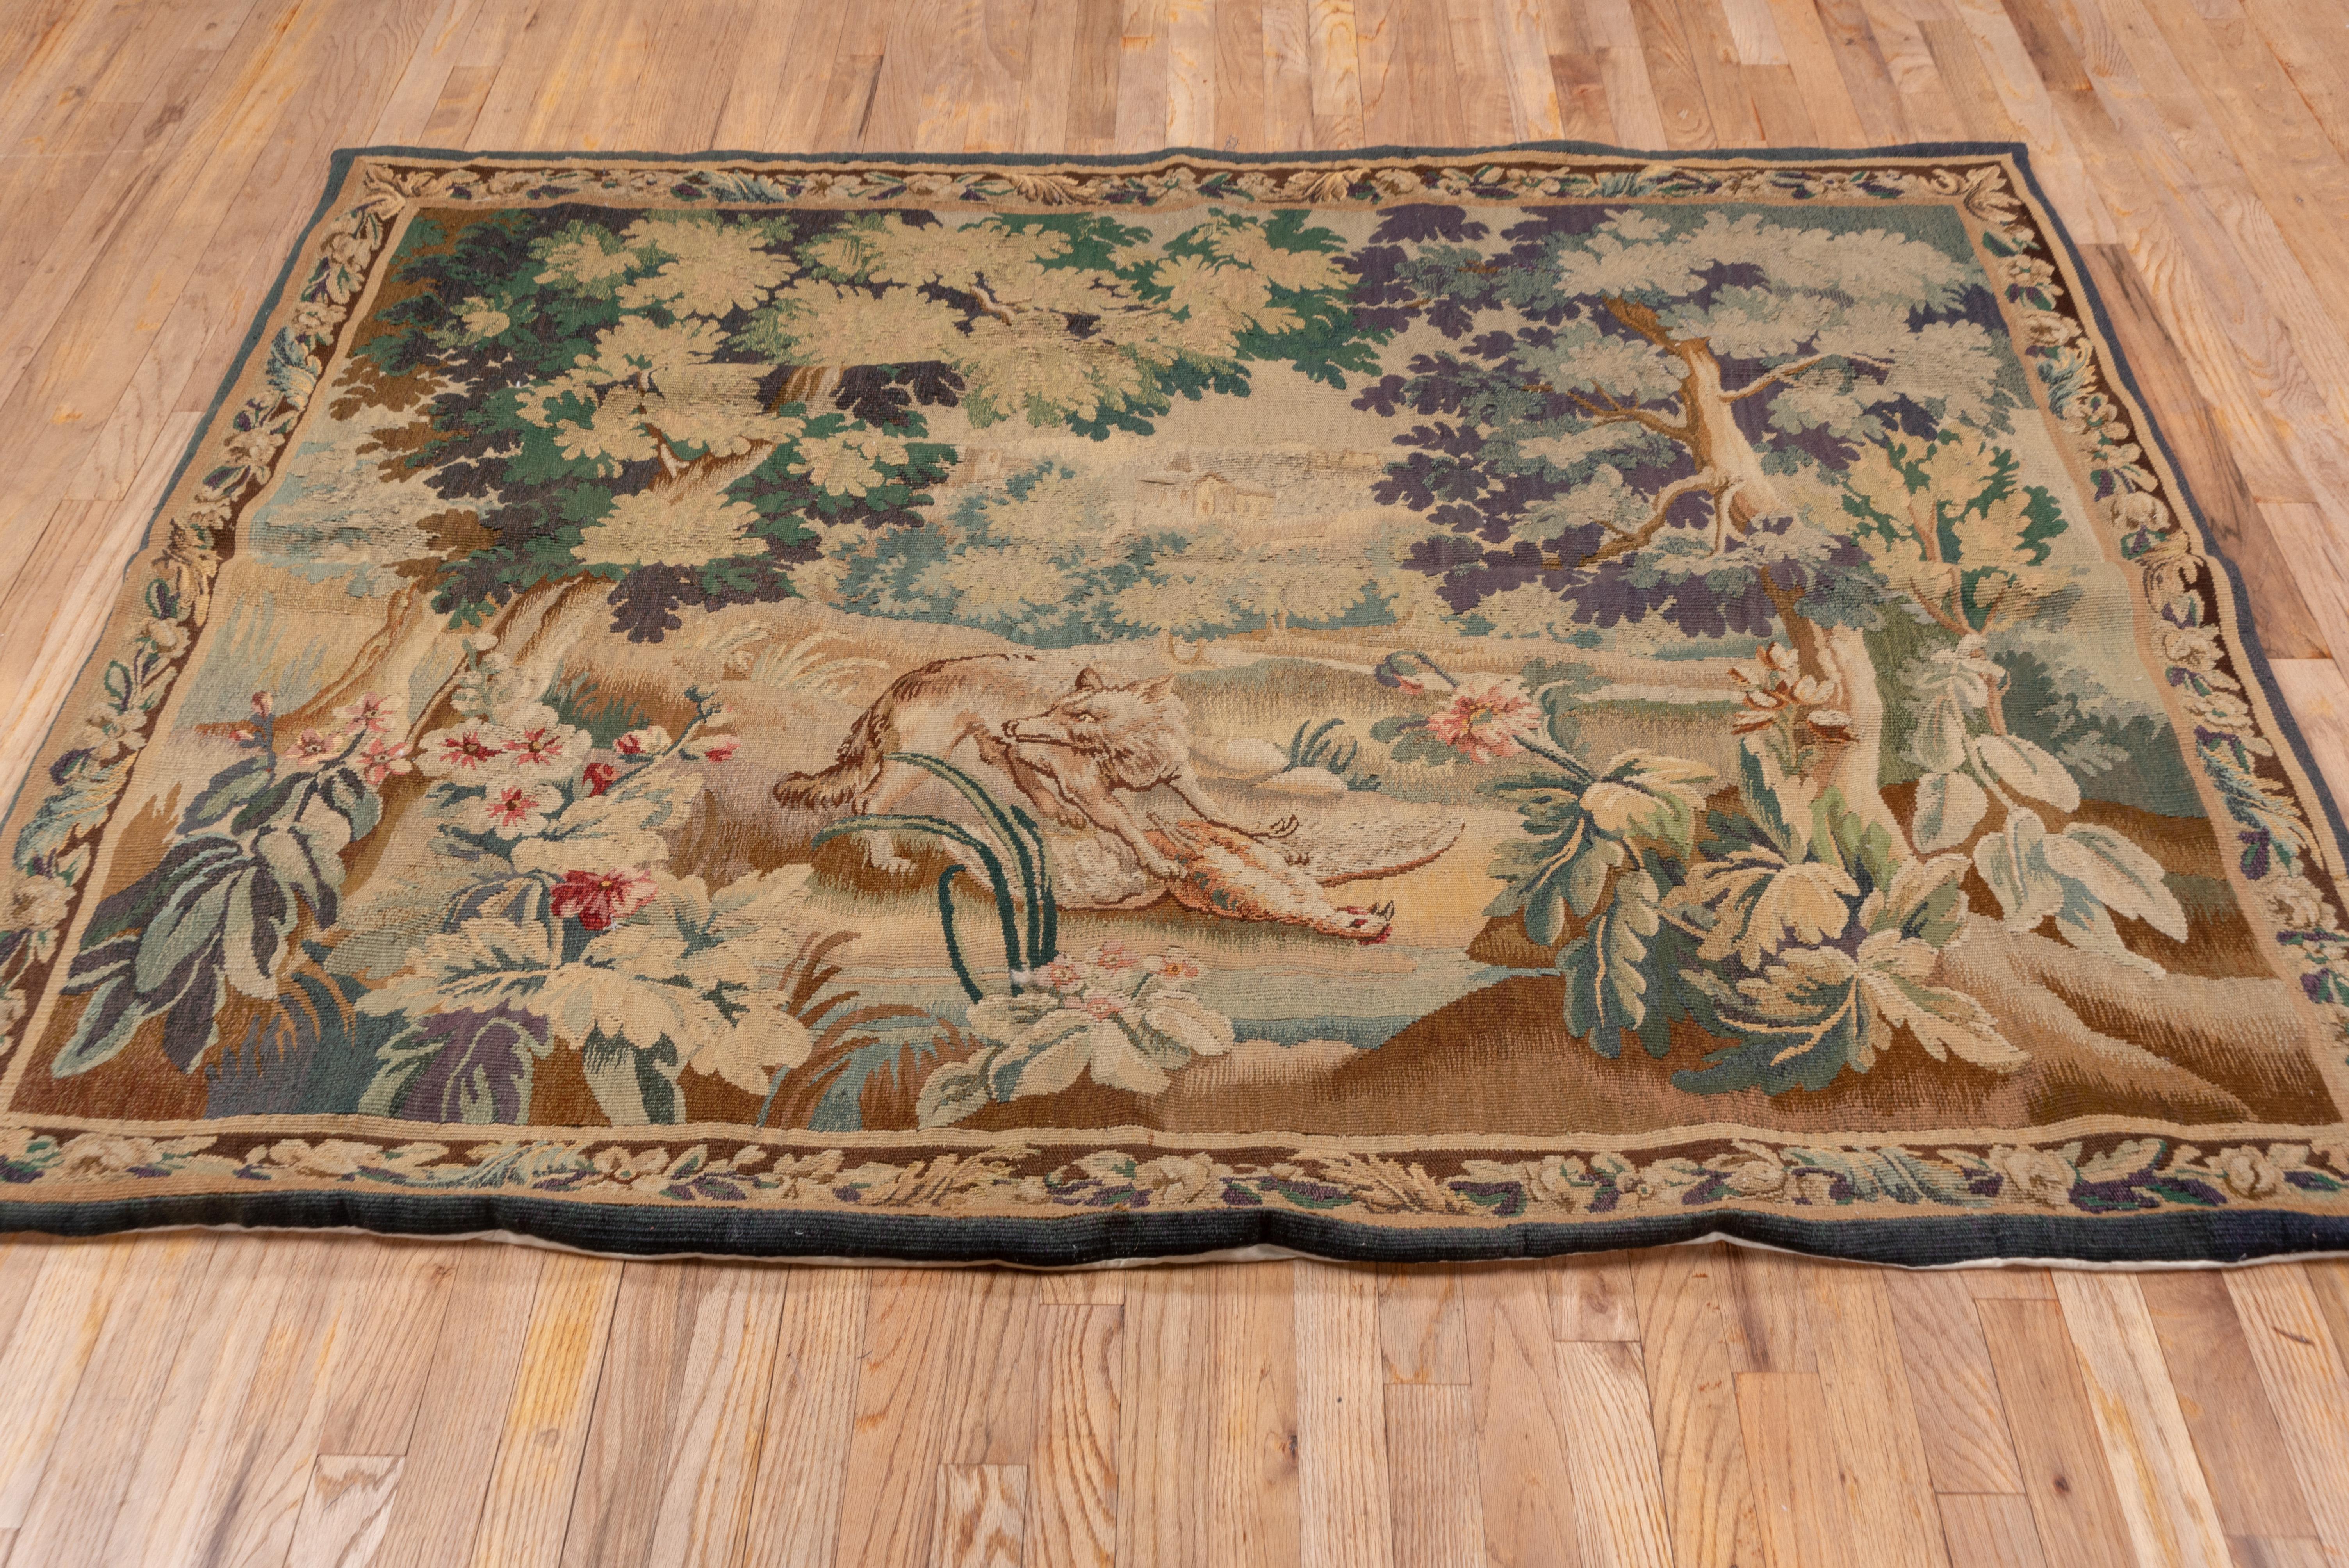 Hand-Woven Antique French Tapestry, circa 1800s, Soft Tones